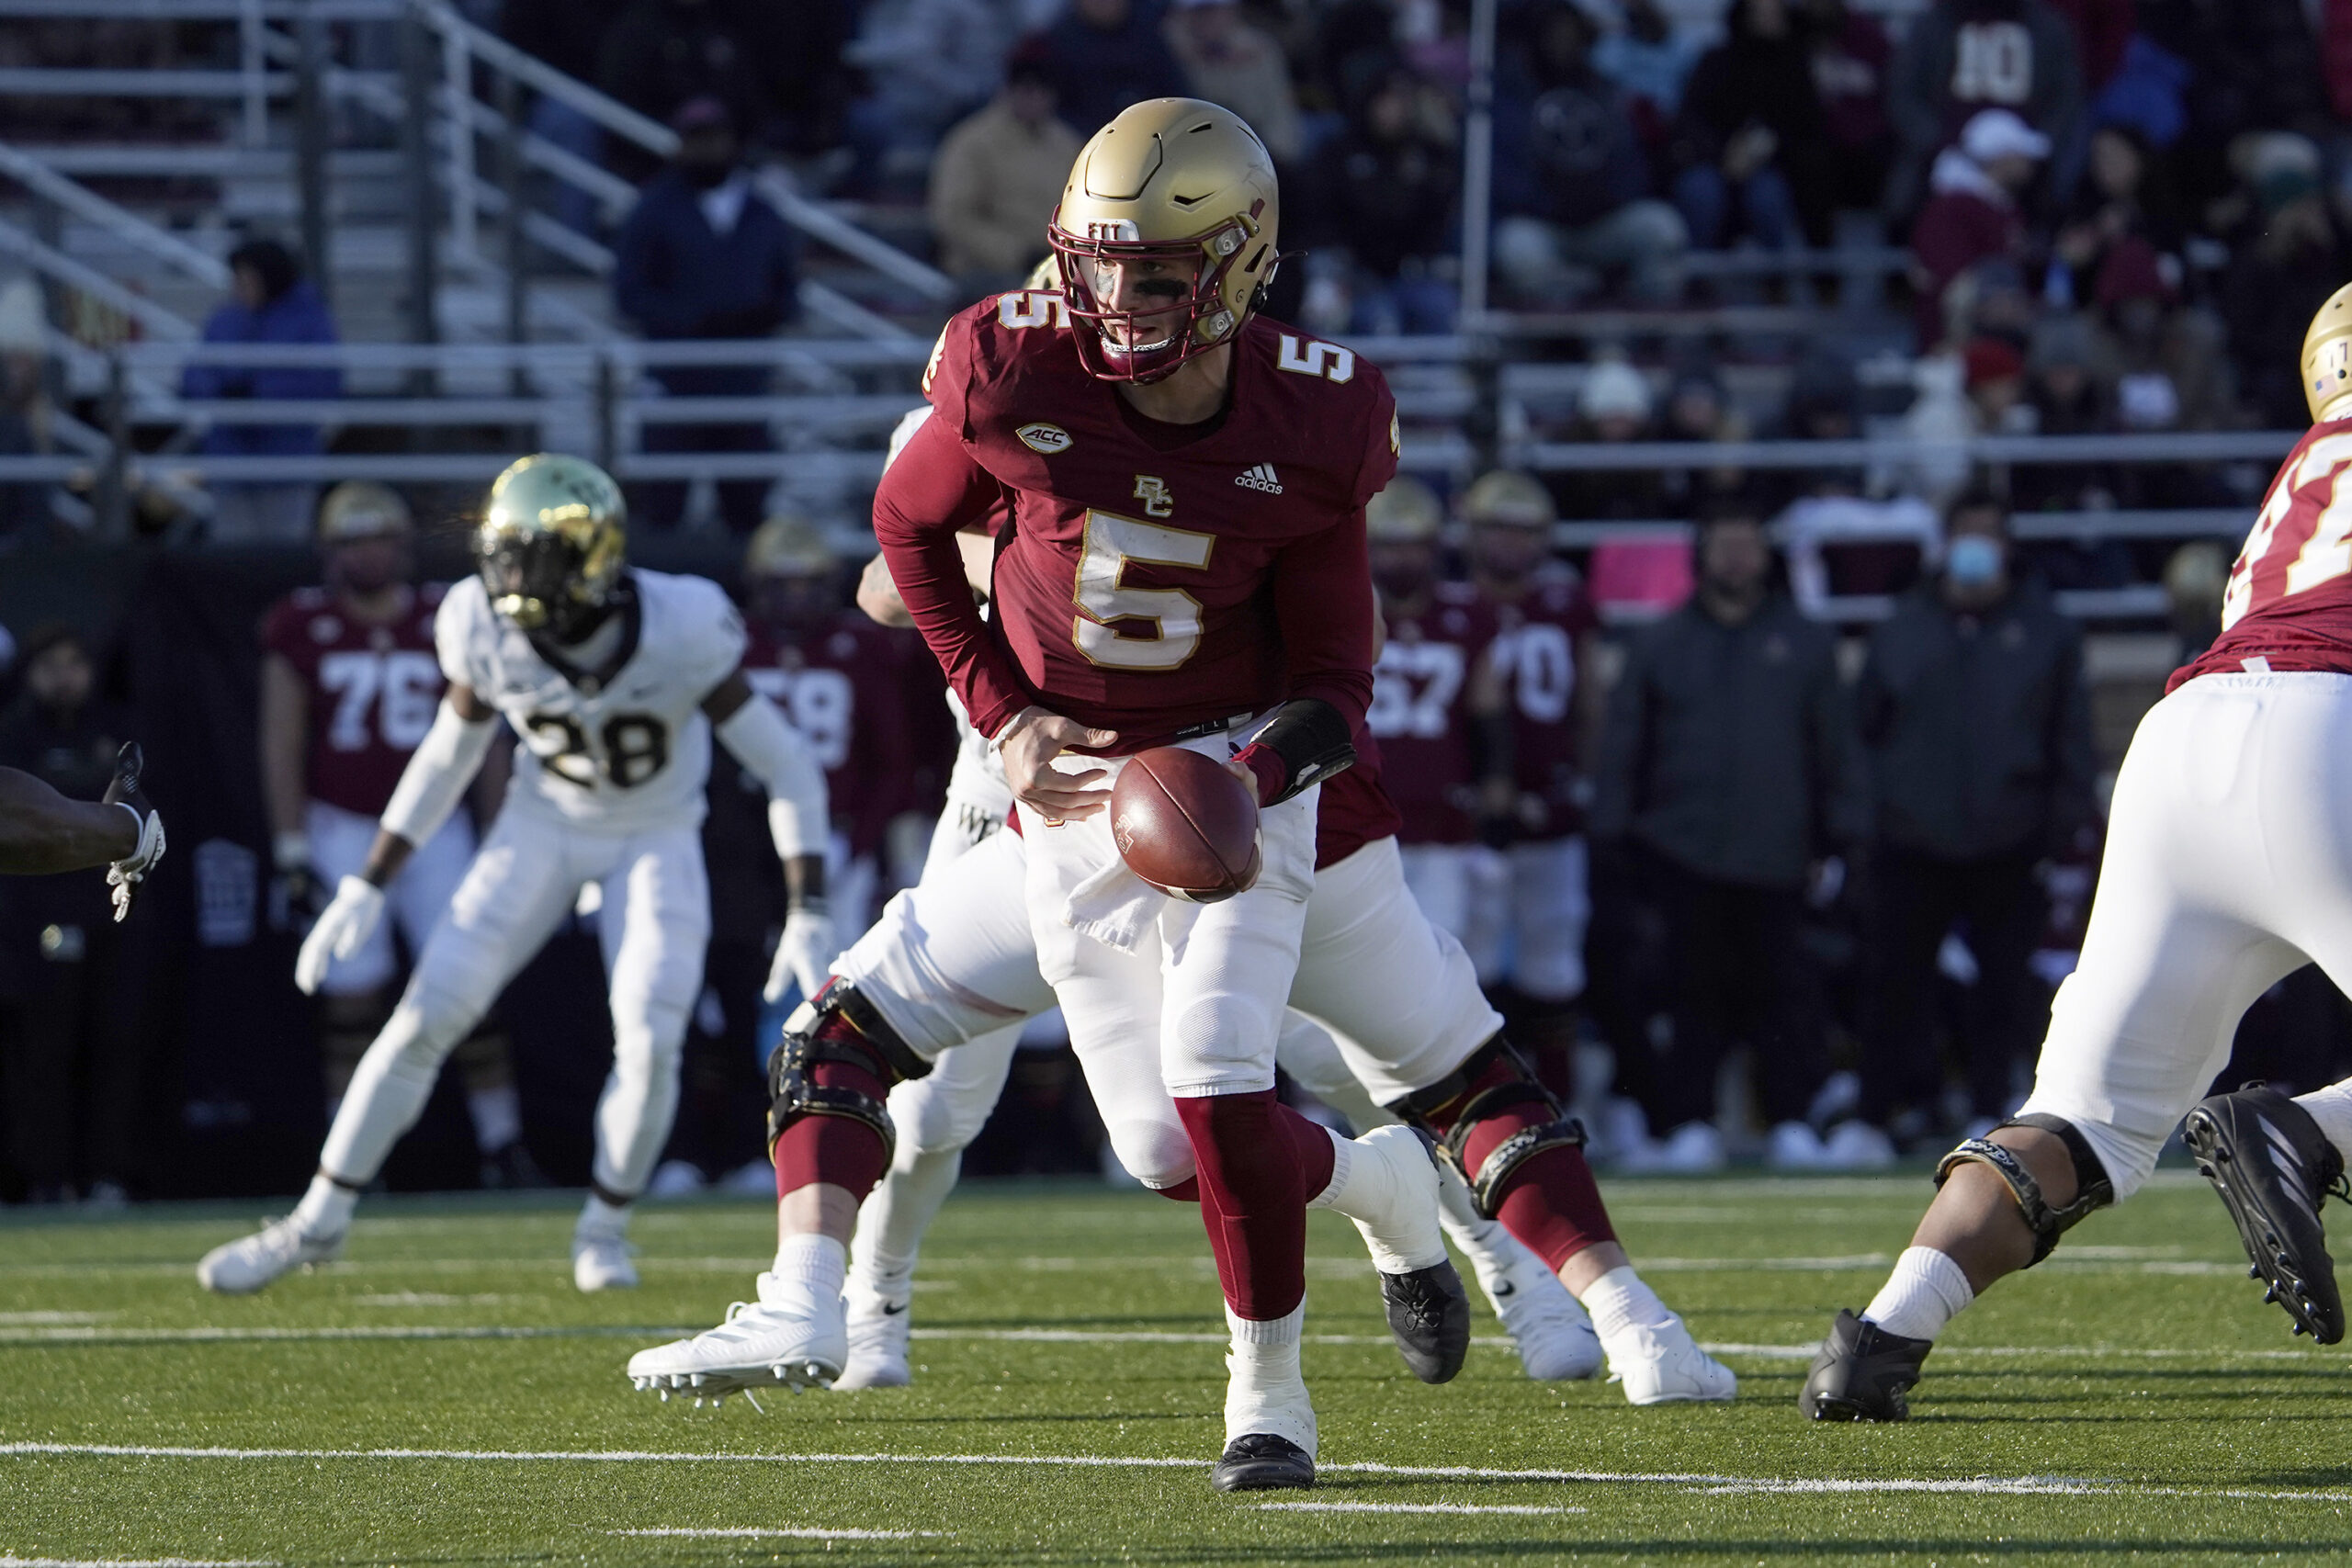 FILE - Boston College quarterback Phil Jurkovec (5) prepares to hand the ball off during the second half of an NCAA college football game against Wake Forest, Saturday, Nov. 27, 2021, in Boston. The Fenway Bowl and Military Bowl have been canceled due to the pandemic as coronavirus outbreaks at Virginia and Boston College forced them to call off their postseason plans. The Military Bowl scheduled for Monday, Dec. 27, at Navy-Marine Corps Memorial Stadium between Boston College and East Carolina was canceled because of positive COVID-19 tests at BC.(AP Photo/Mary Schwalm, File)